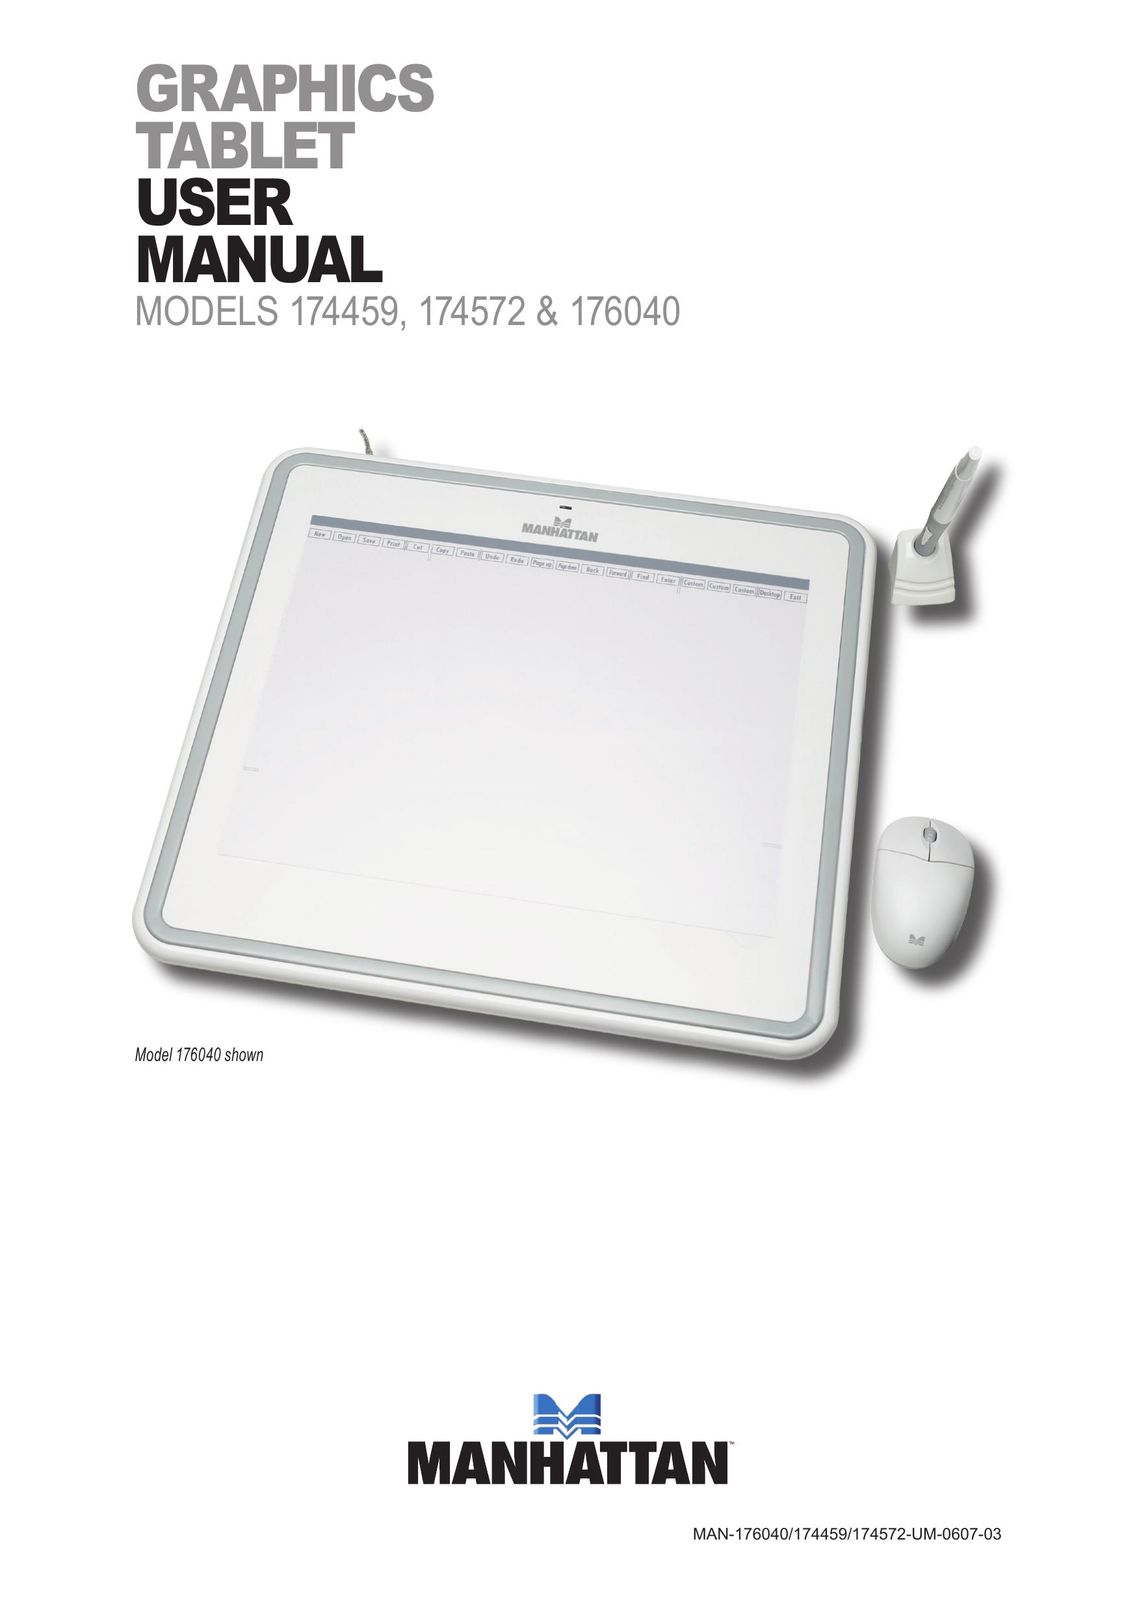 Manhattan Computer Products 174459 Graphics Tablet User Manual